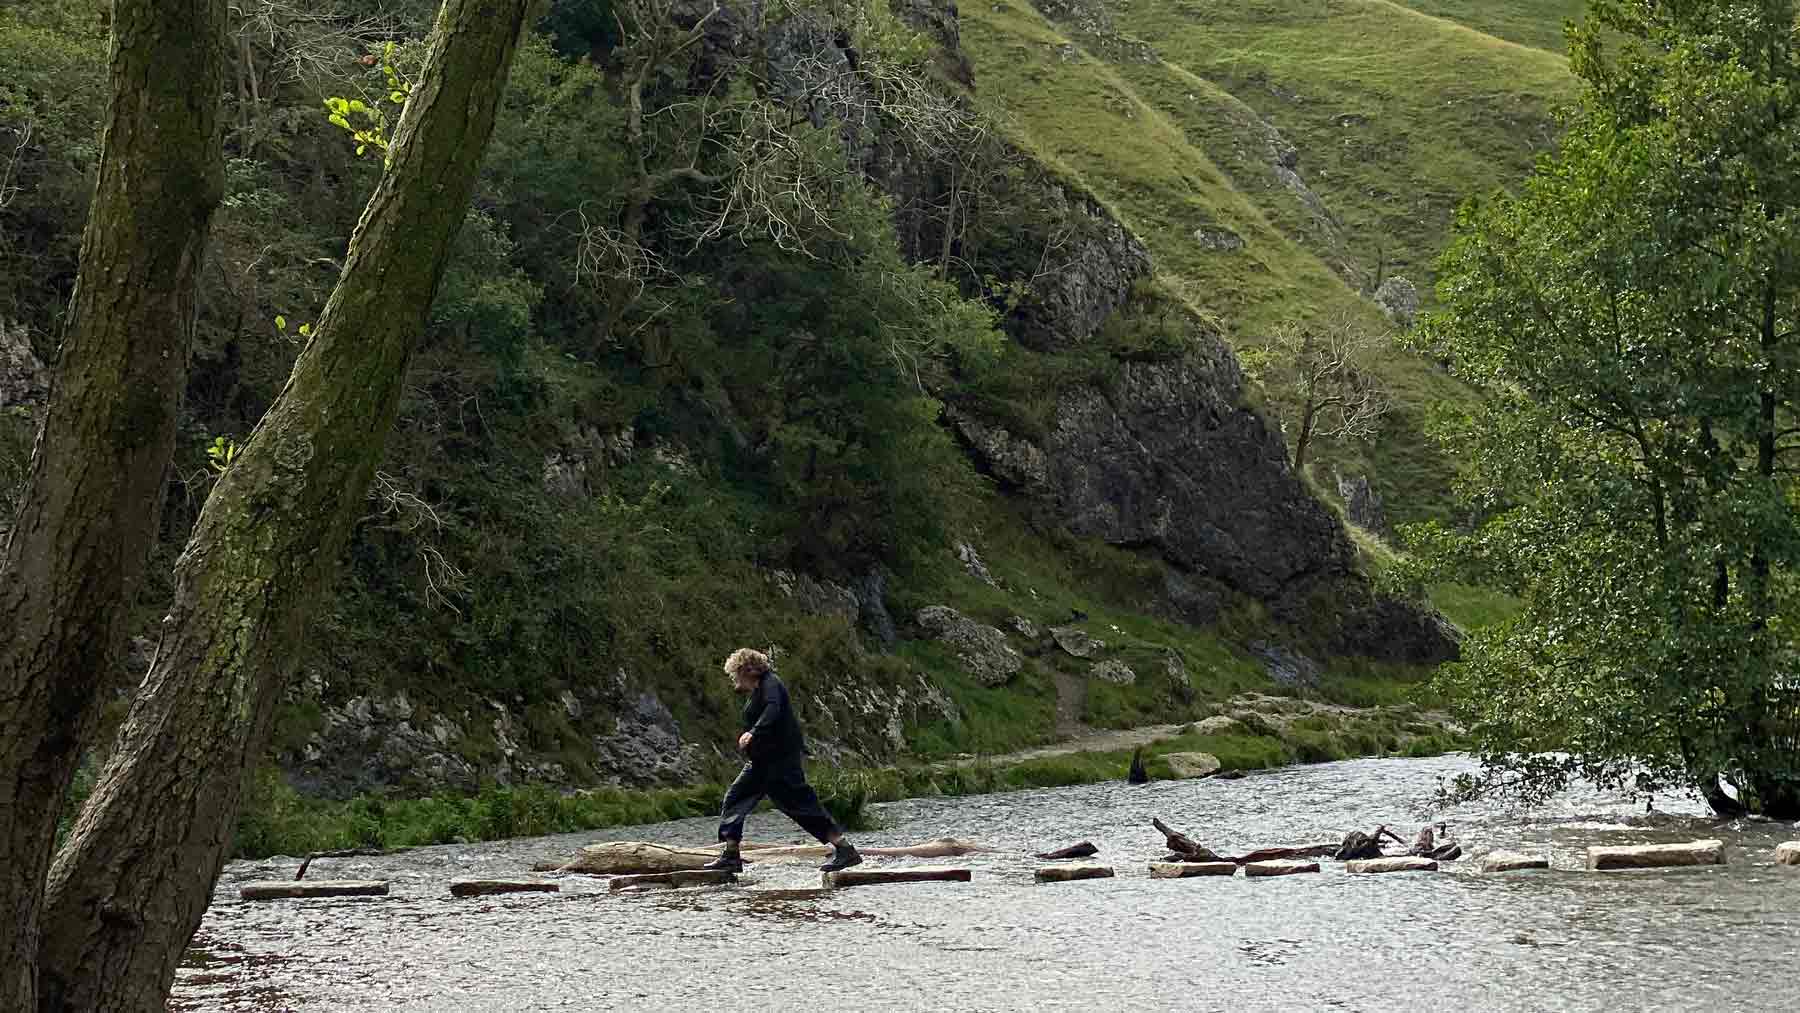 Clare wearing Asmuss jumping across the Dovedale Stepping Stones in the Peak District